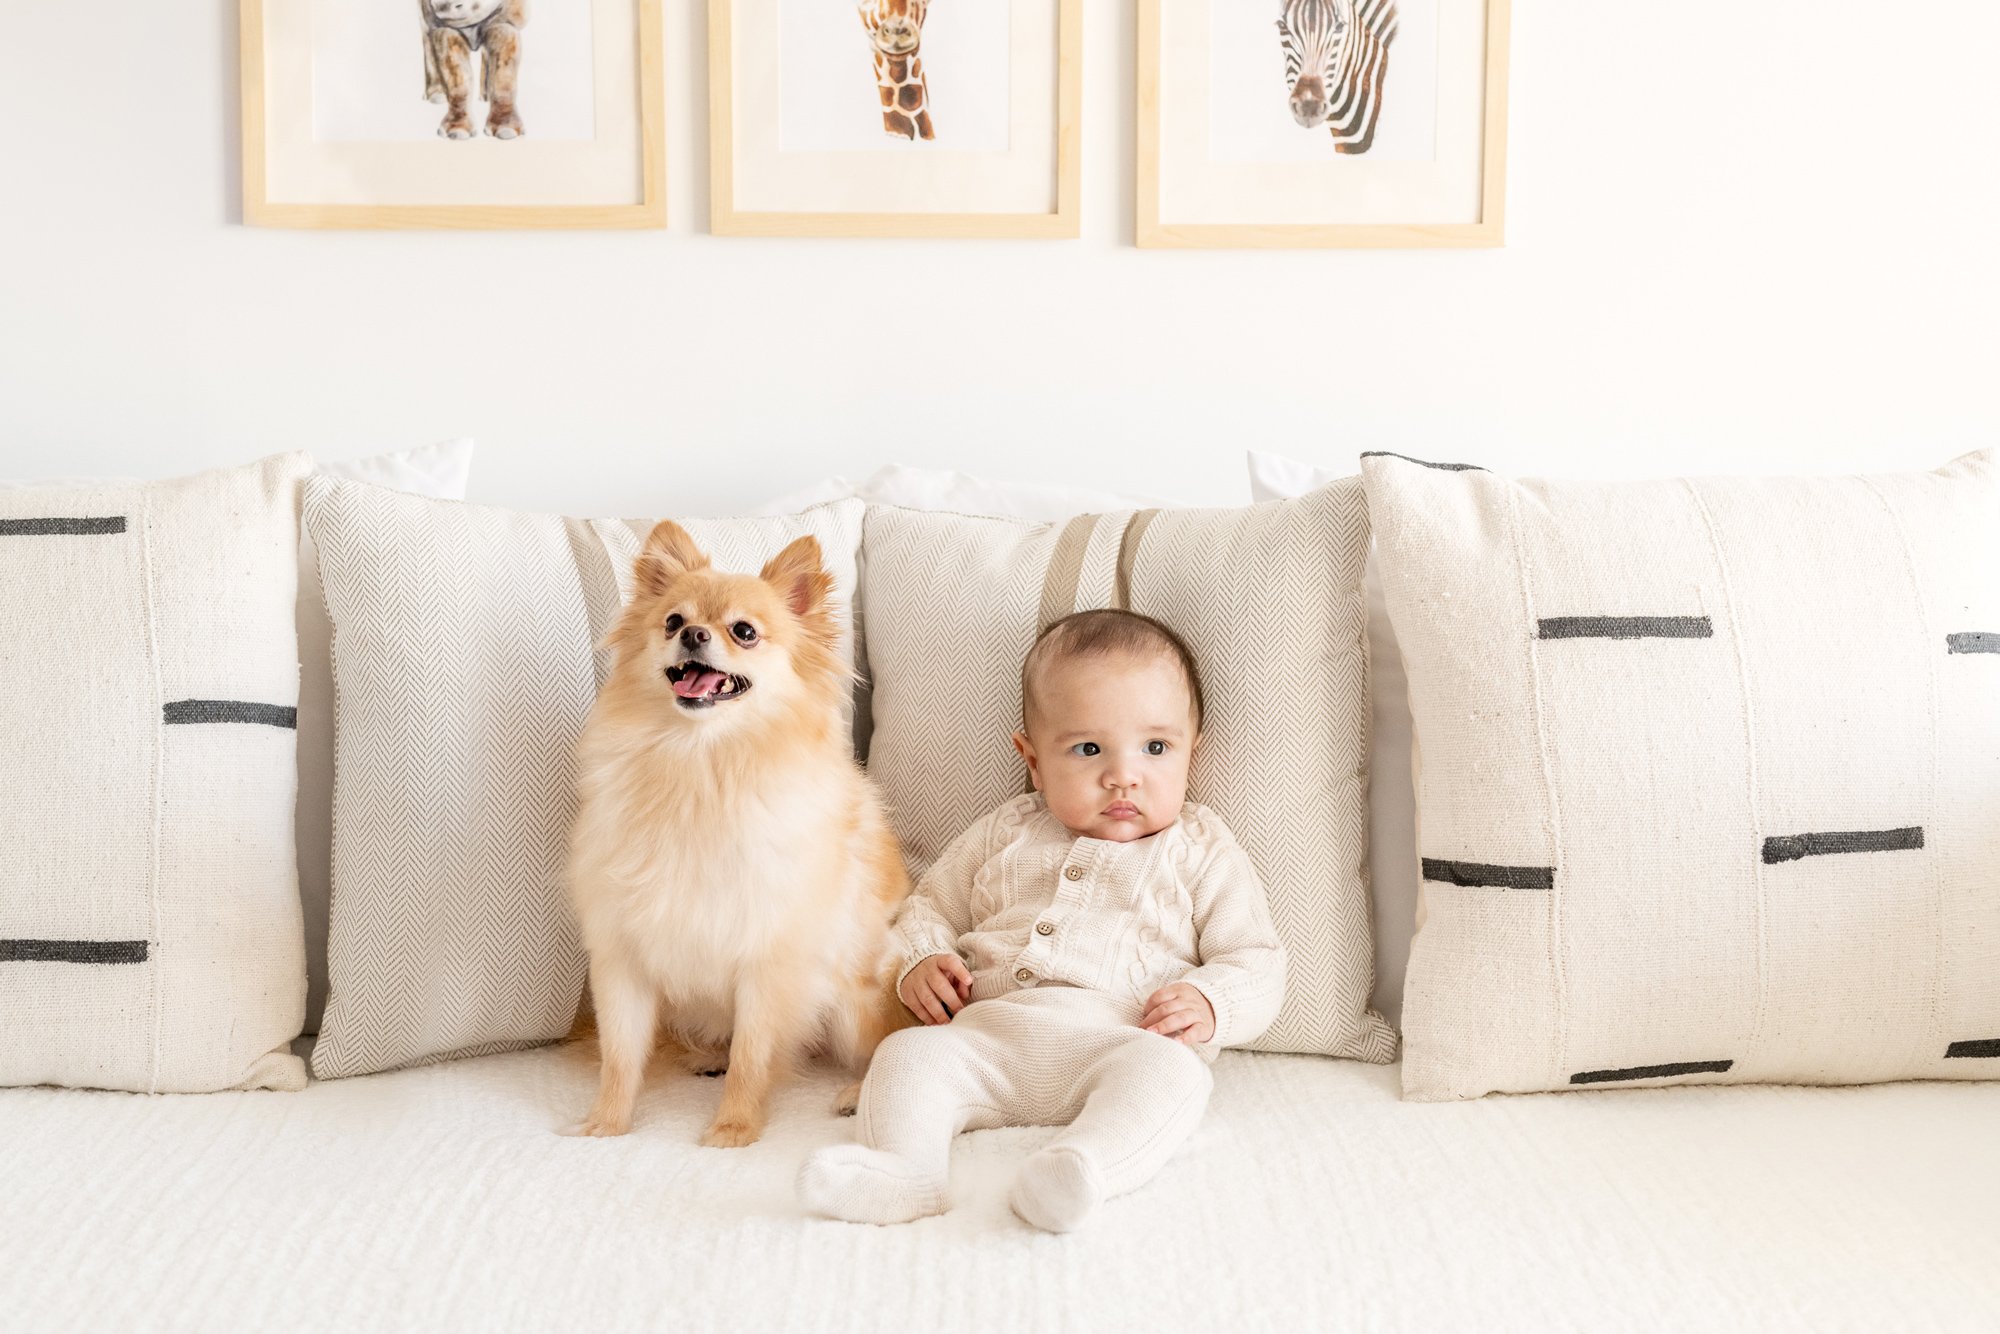  Newborn baby boy sitting on a couch in his nursery with his puppy sibling by Nicole Hawkins Photography. portrait fur sibling #NicoleHawkinsPhotography #InHomeNewborns #NurseryNewborns #NYCbabyphotography #babyportraits #ZooNursery #familyportraits 